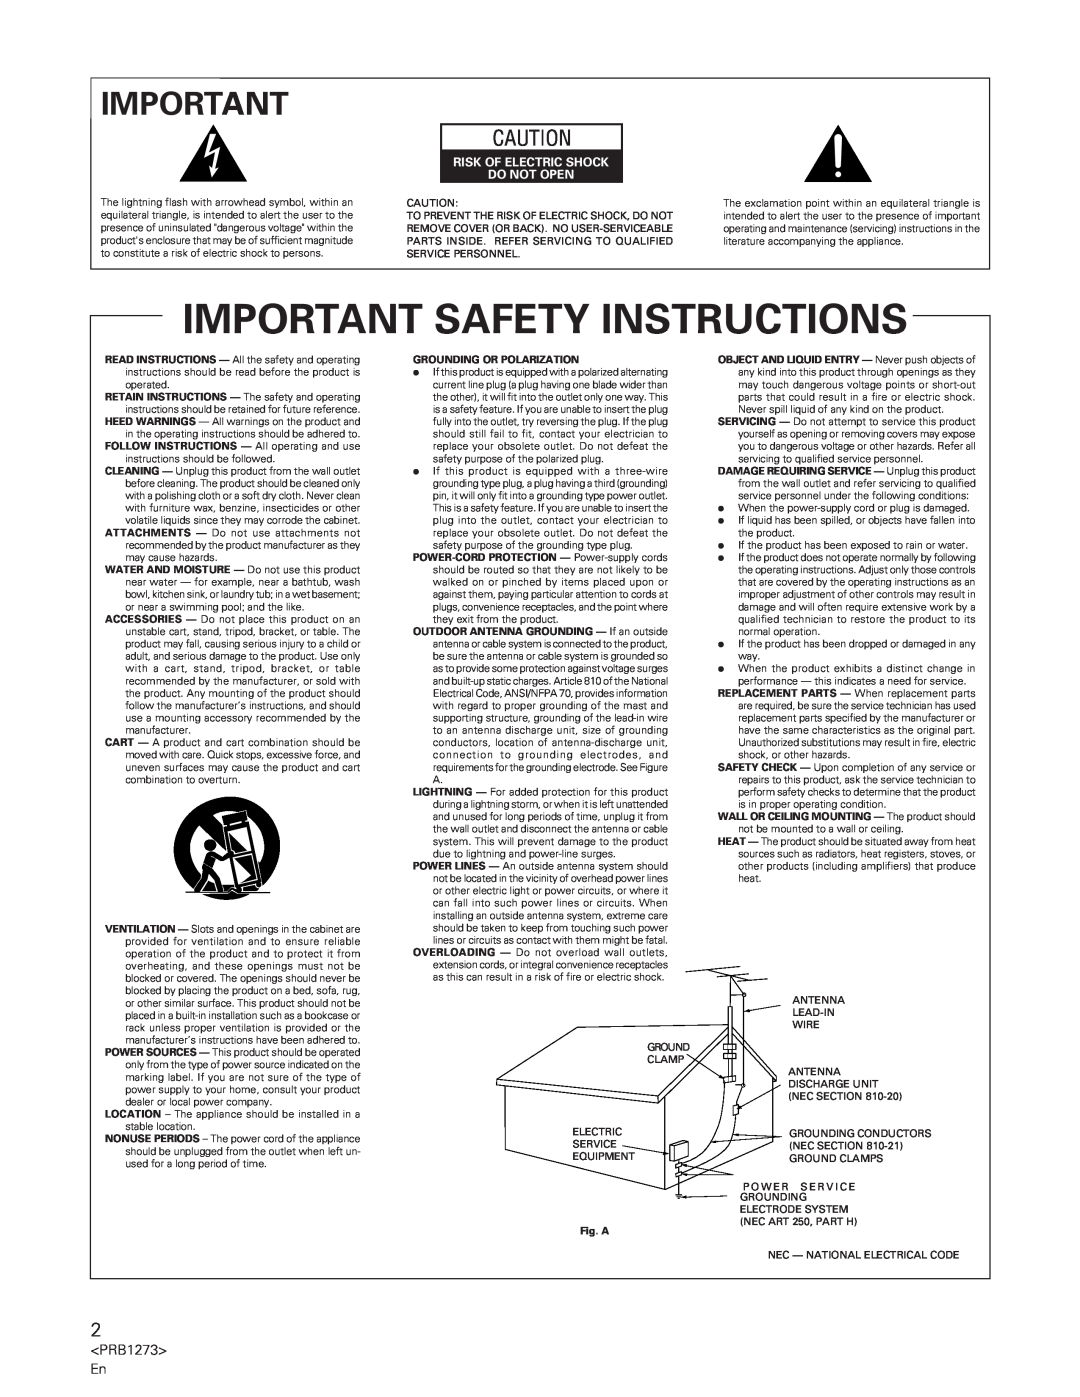 Pioneer PD-F957 Important Safety Instructions, Risk Of Electric Shock Do Not Open, Grounding Or Polarization, Fig. A 